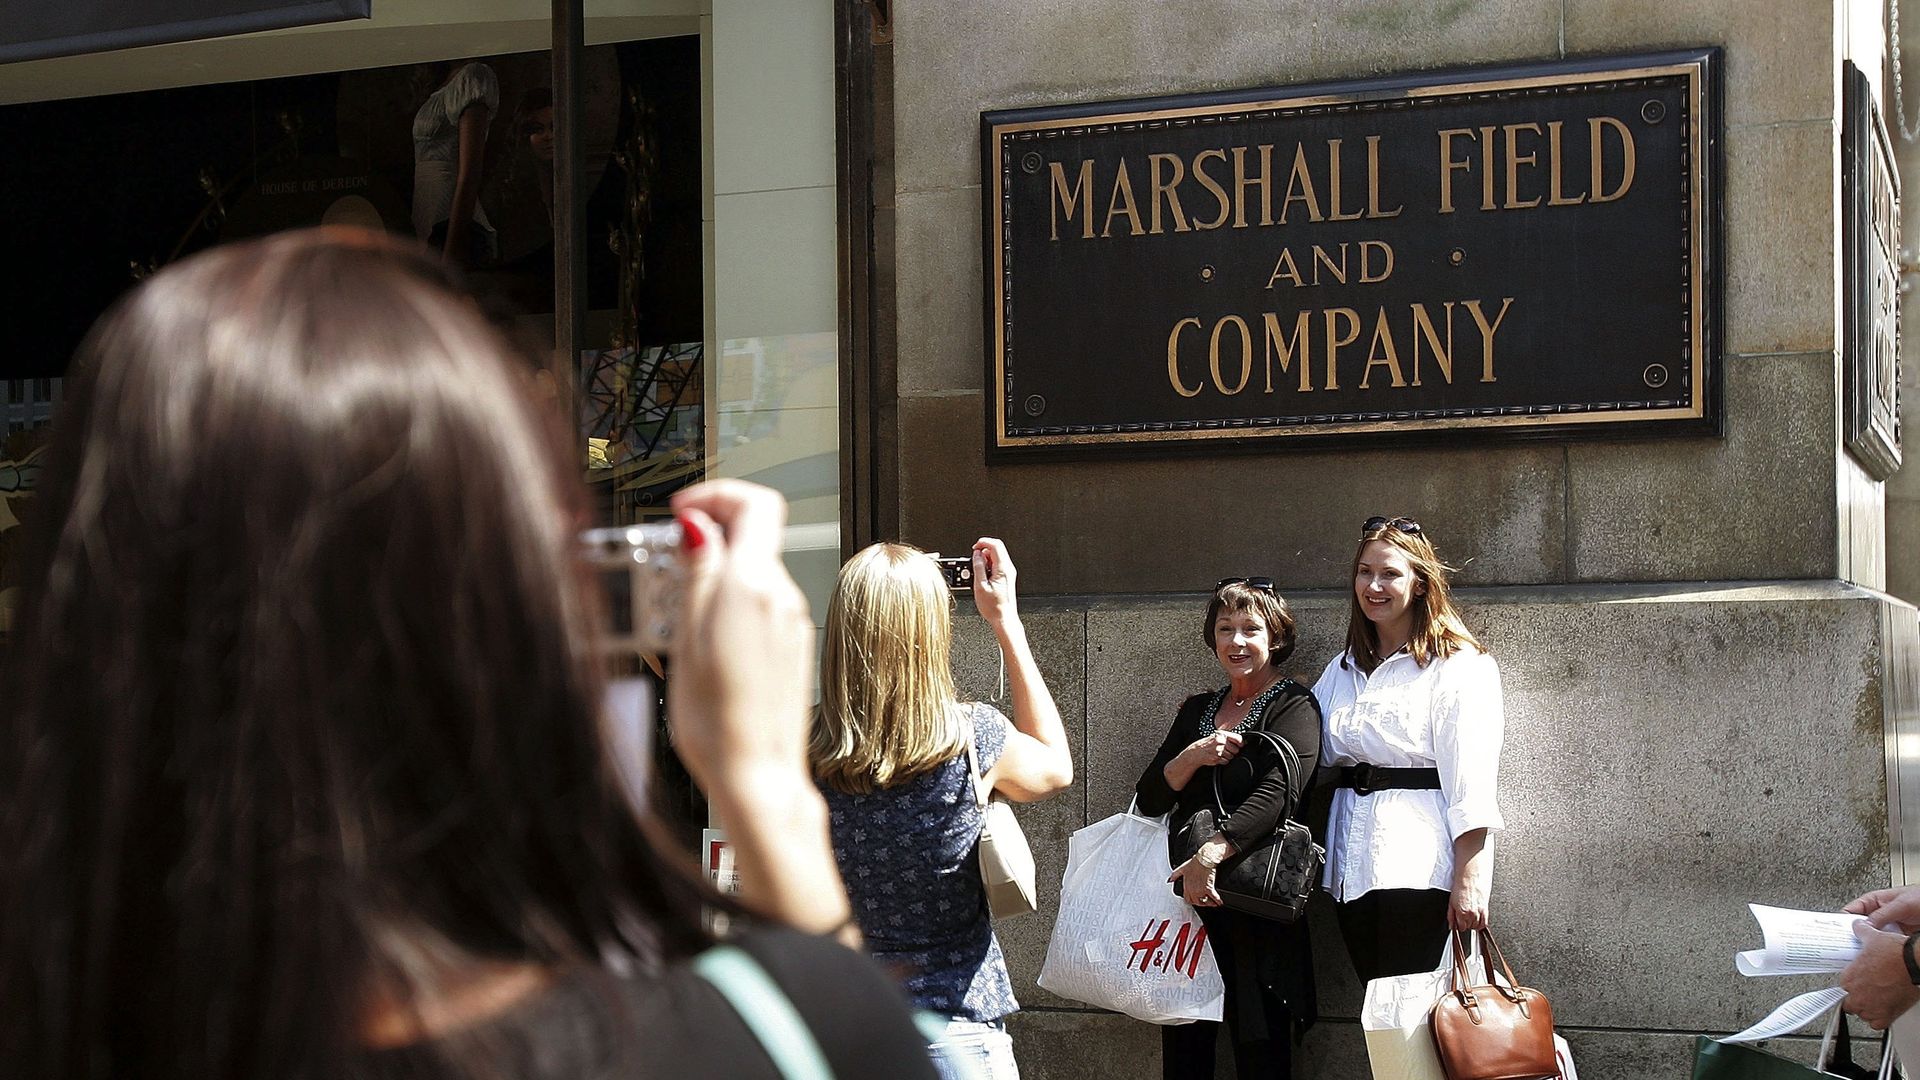 Photo of people taking photos in front of a sign that says "Marshall Field and Company." 